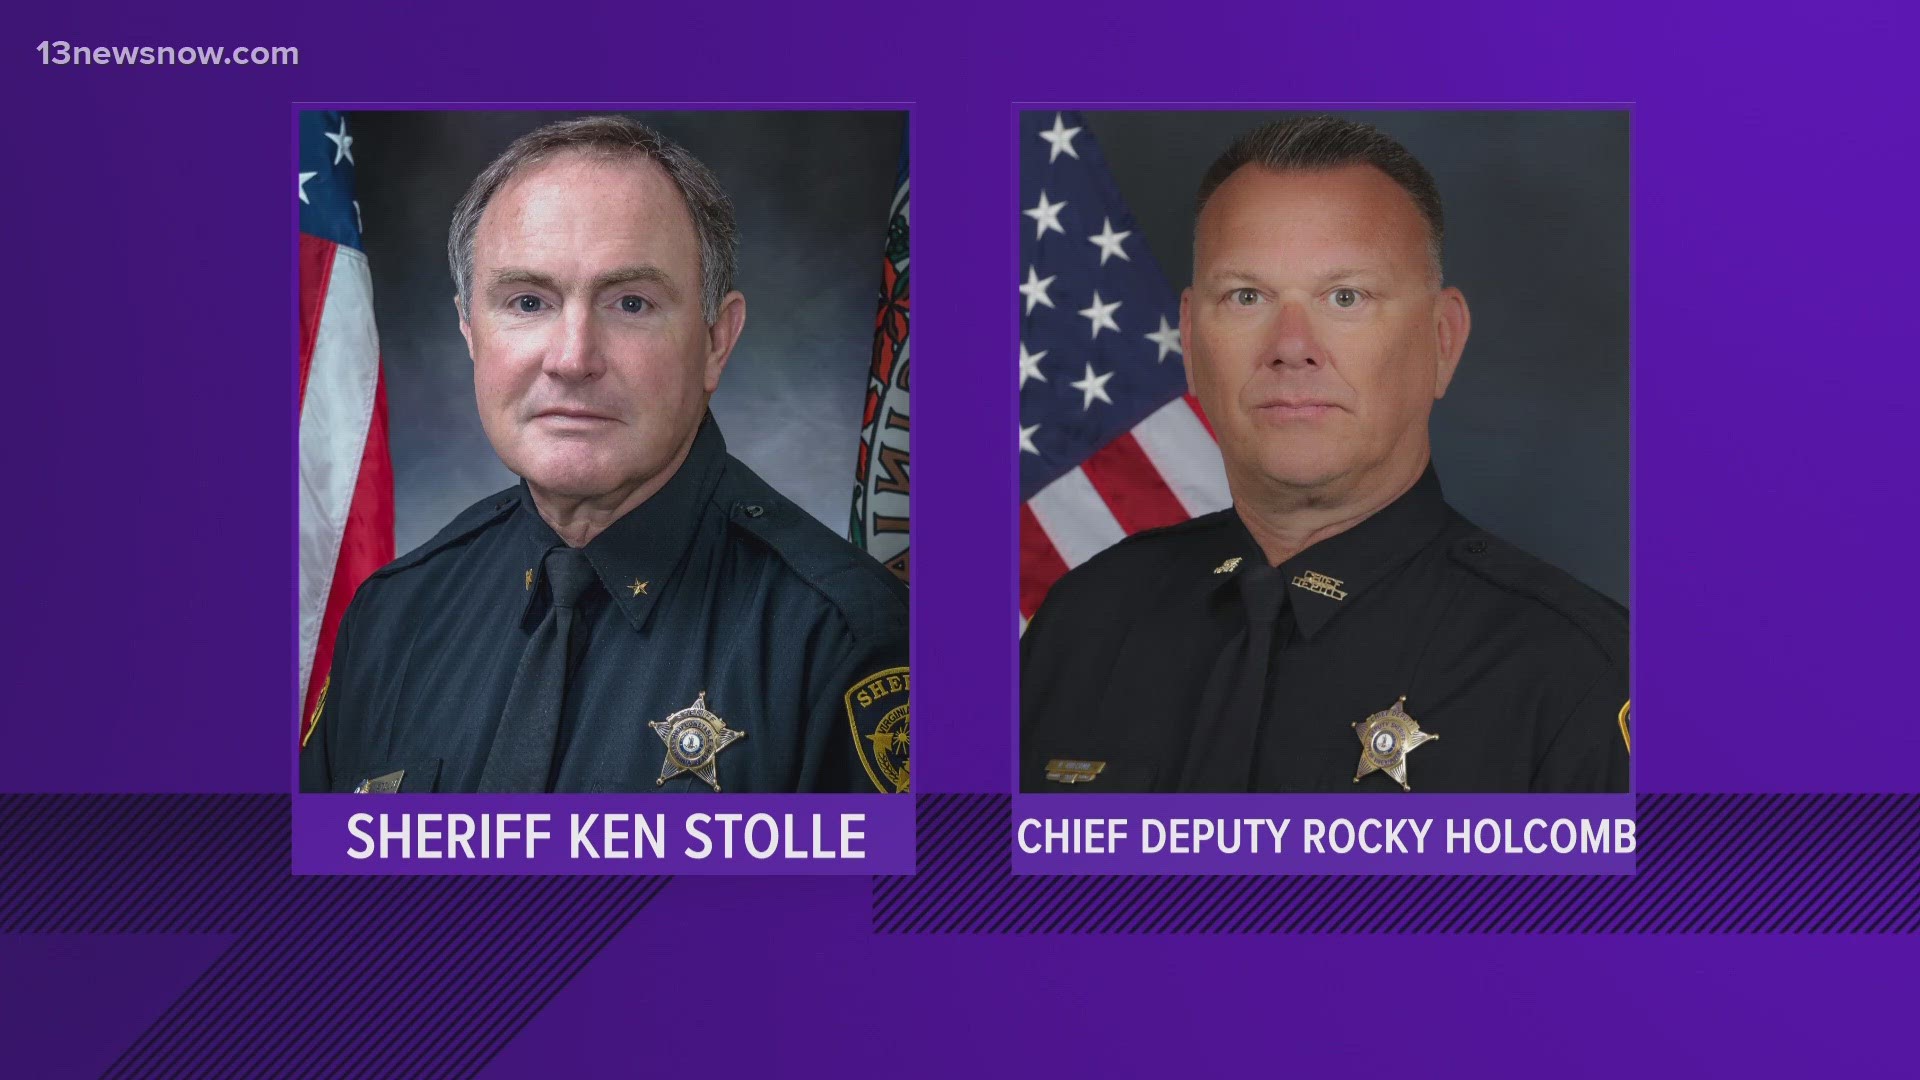 Changes are coming to the Virginia Beach Sheriff's Office and city council. Sheriff Ken Stolle announced he's retiring after 13 years on the job.